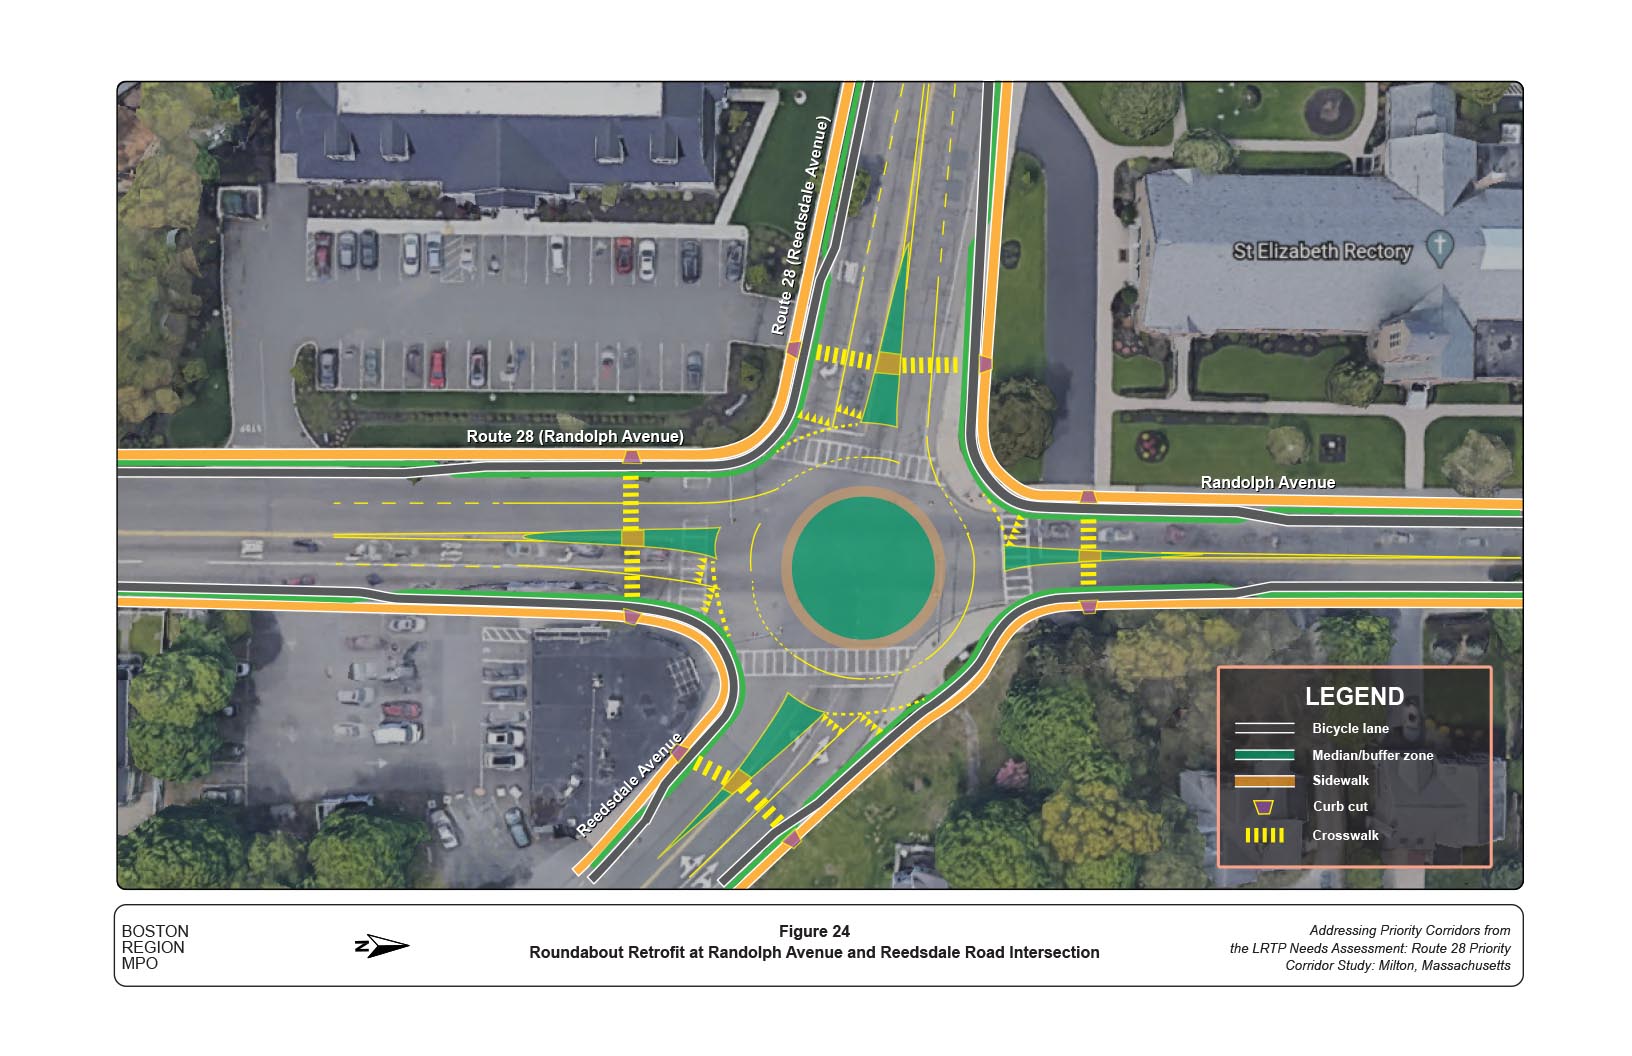 Figure 24
Roundabout Retrofit at Randolph Avenue and Reedsdale Road Intersection 
Figure 24 shows the layout of the Roundabout Retrofit at Randolph Avenue and Reedsdale Road Intersection.
